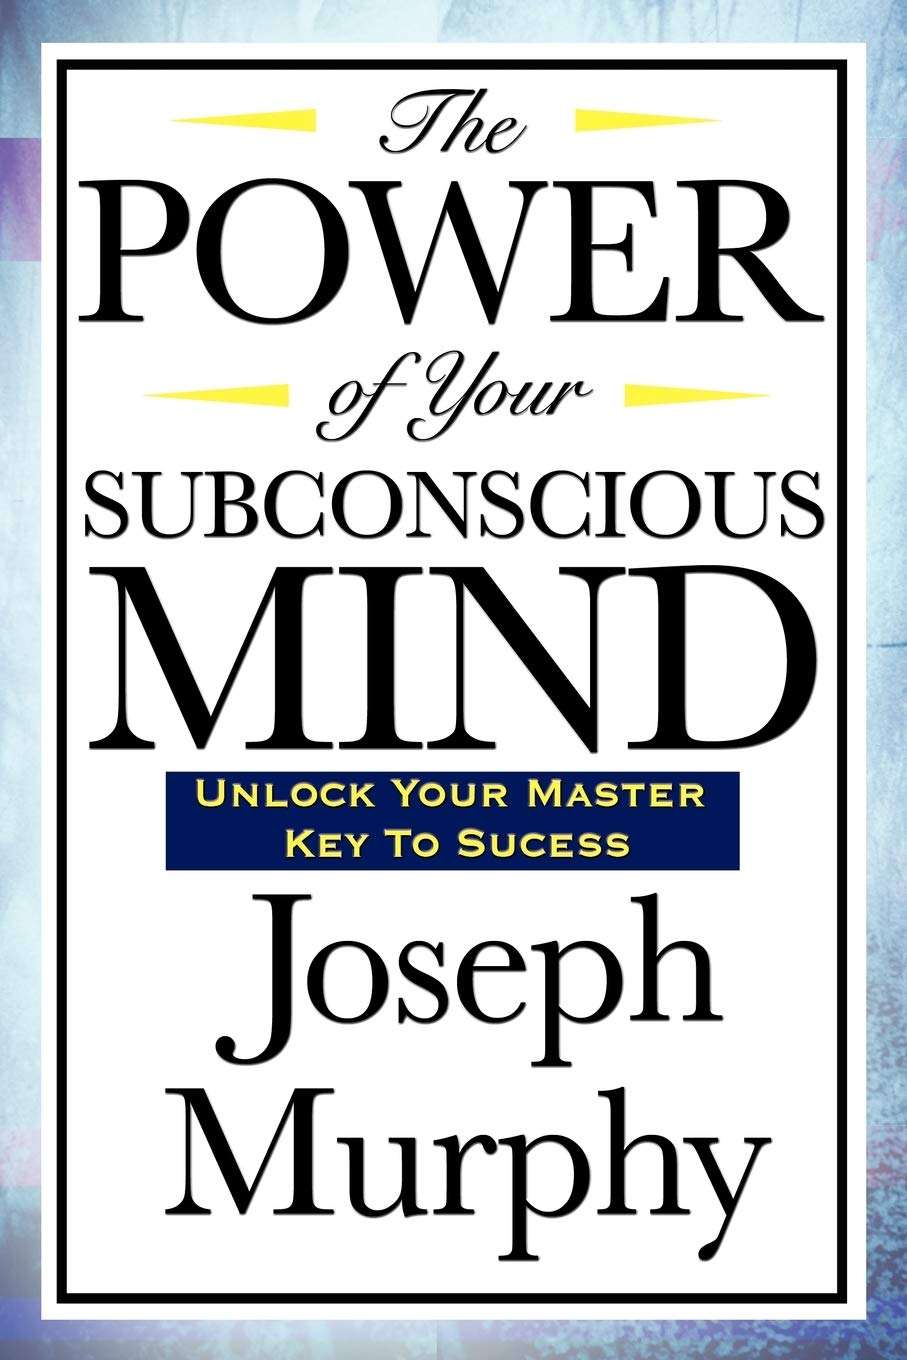 The power of your subconscious mind book